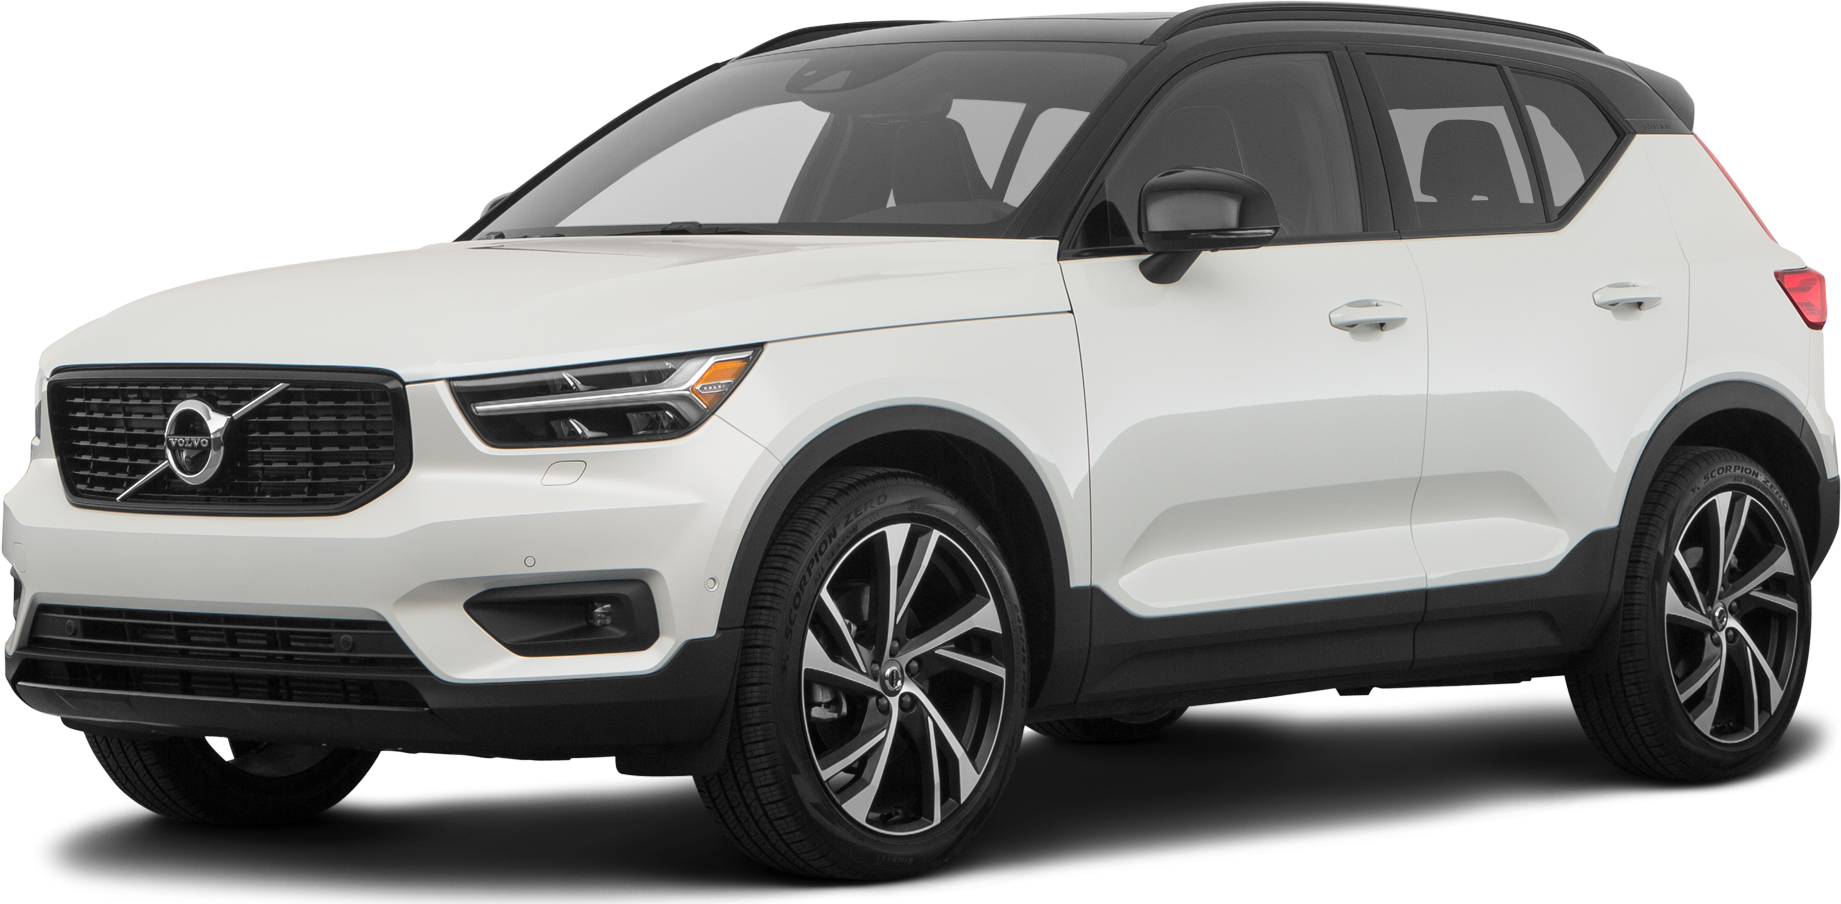 https://file.kelleybluebookimages.com/kbb/base/evox/CP/12866/2019-Volvo-XC40-front_12866_032_1841x904_707_cropped.png